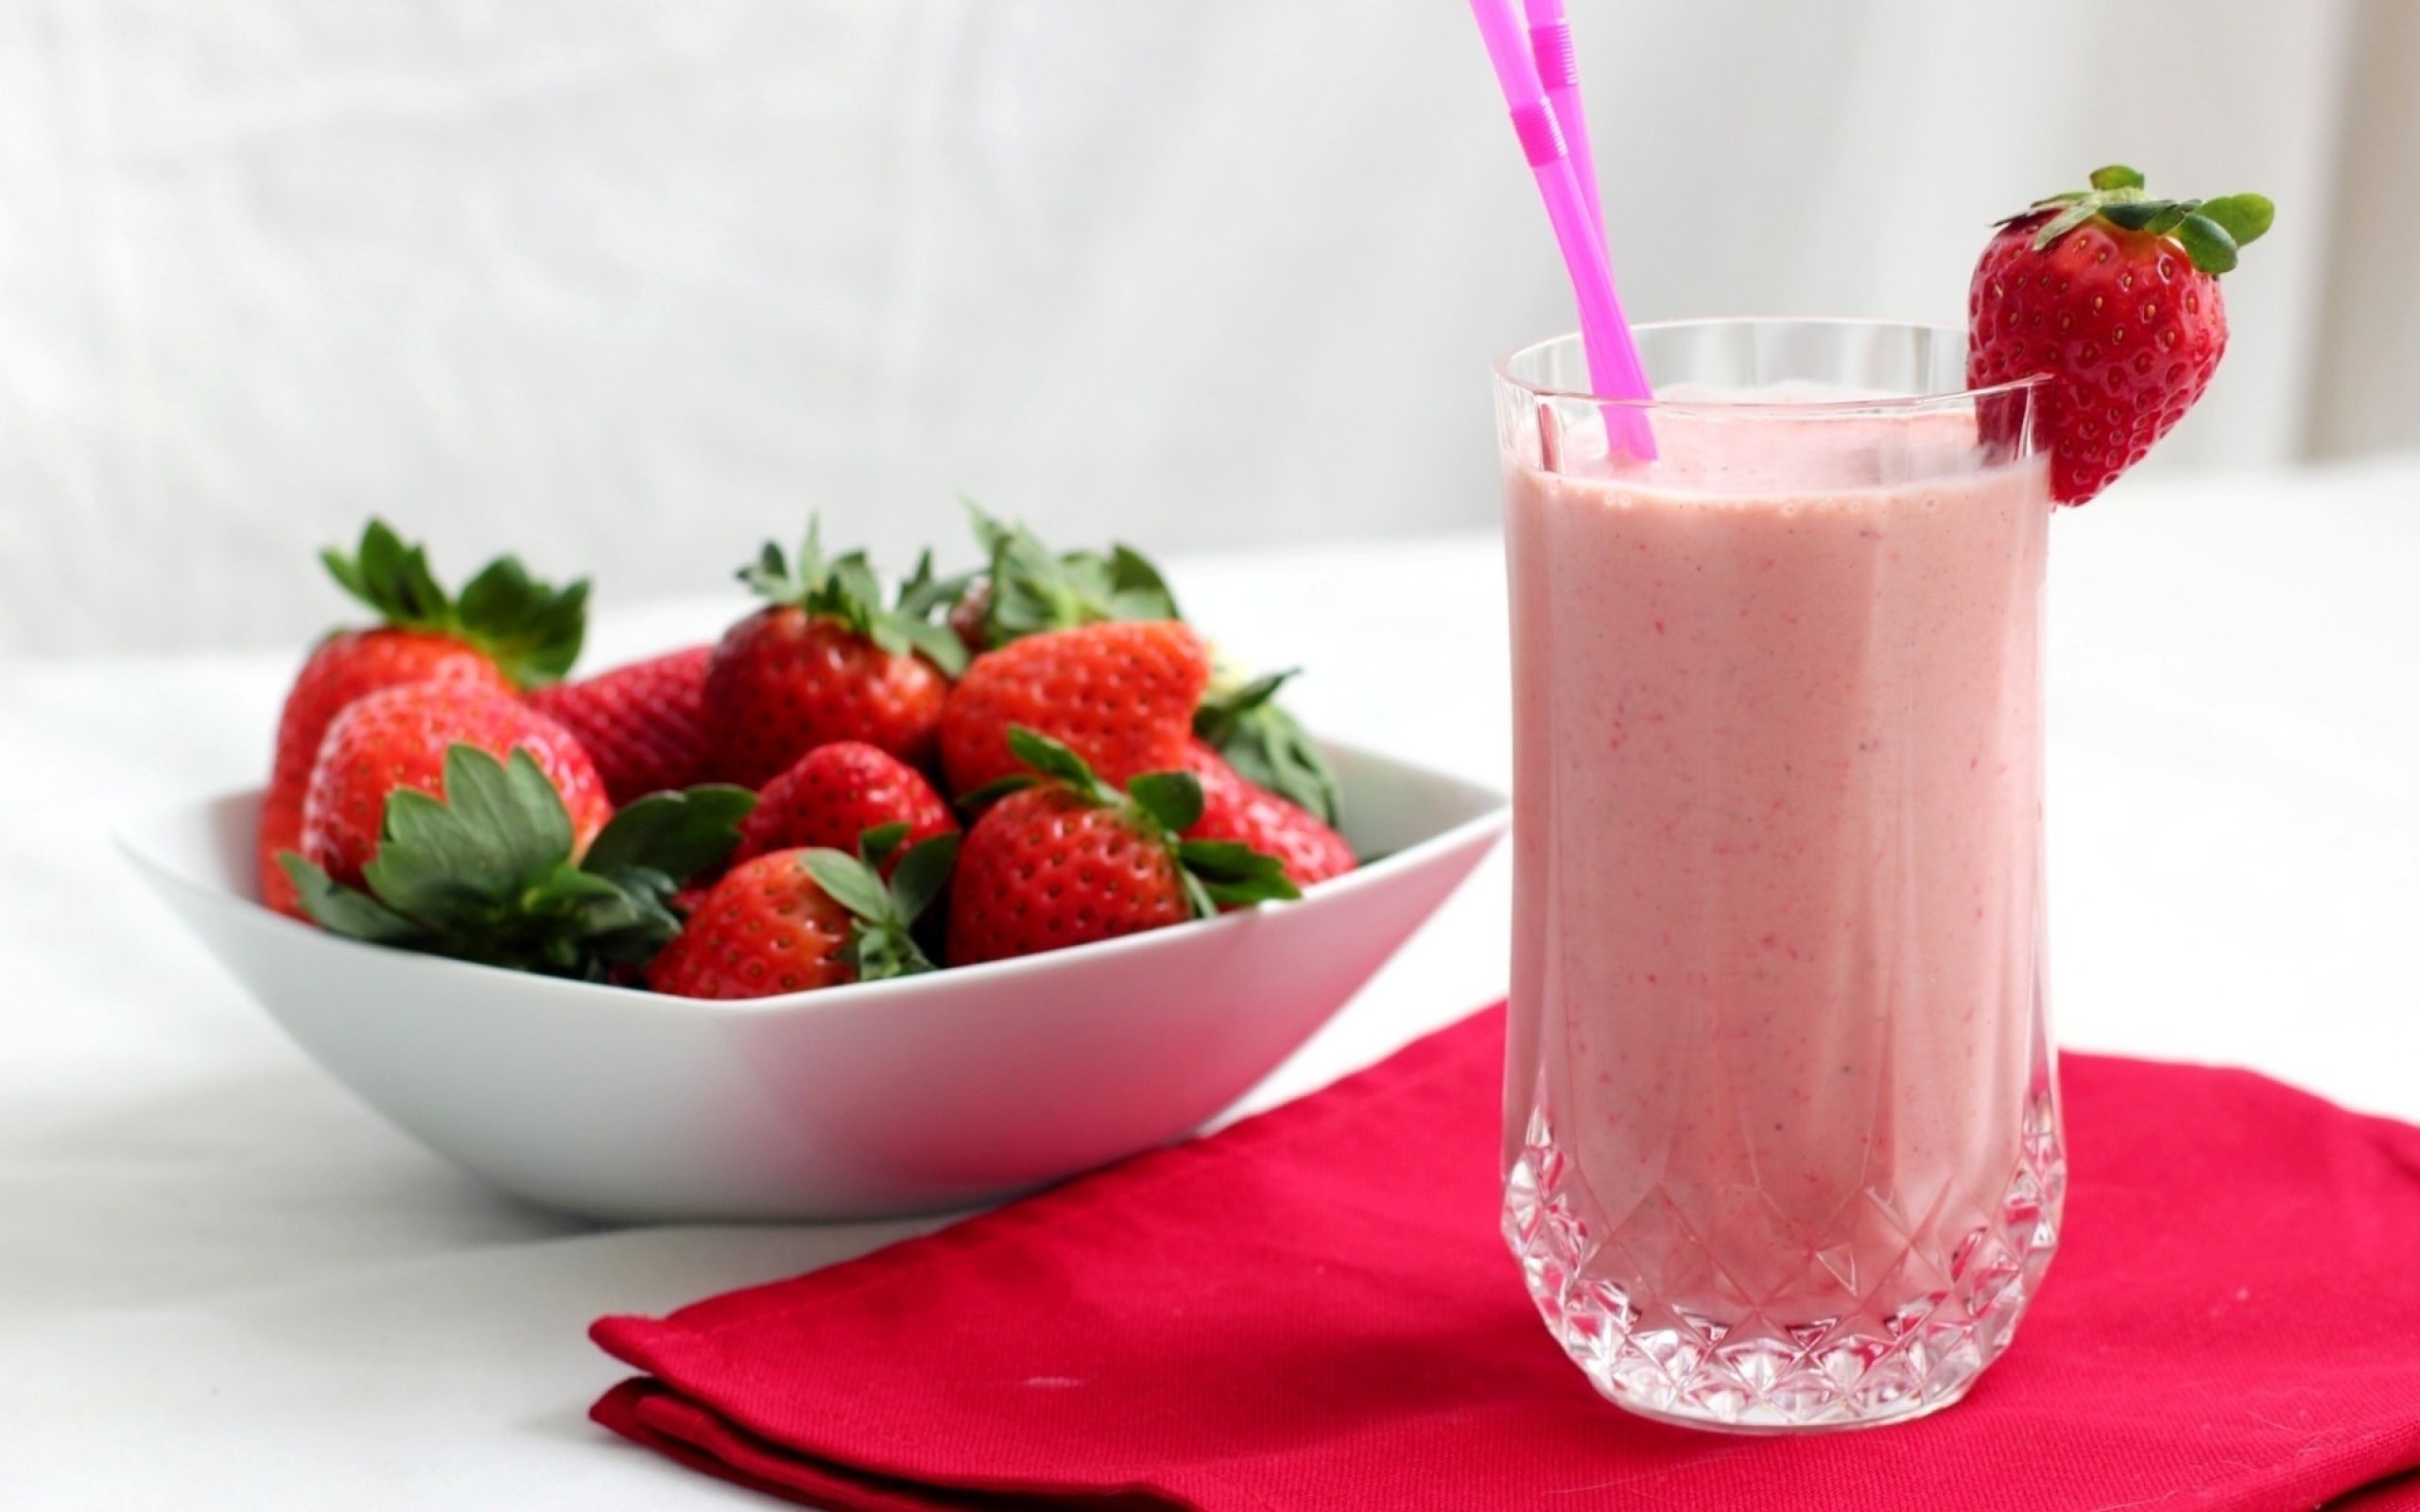 Milkshake: Made with ice cream, milk, and any additional flavors, Strawberry. 2560x1600 HD Wallpaper.